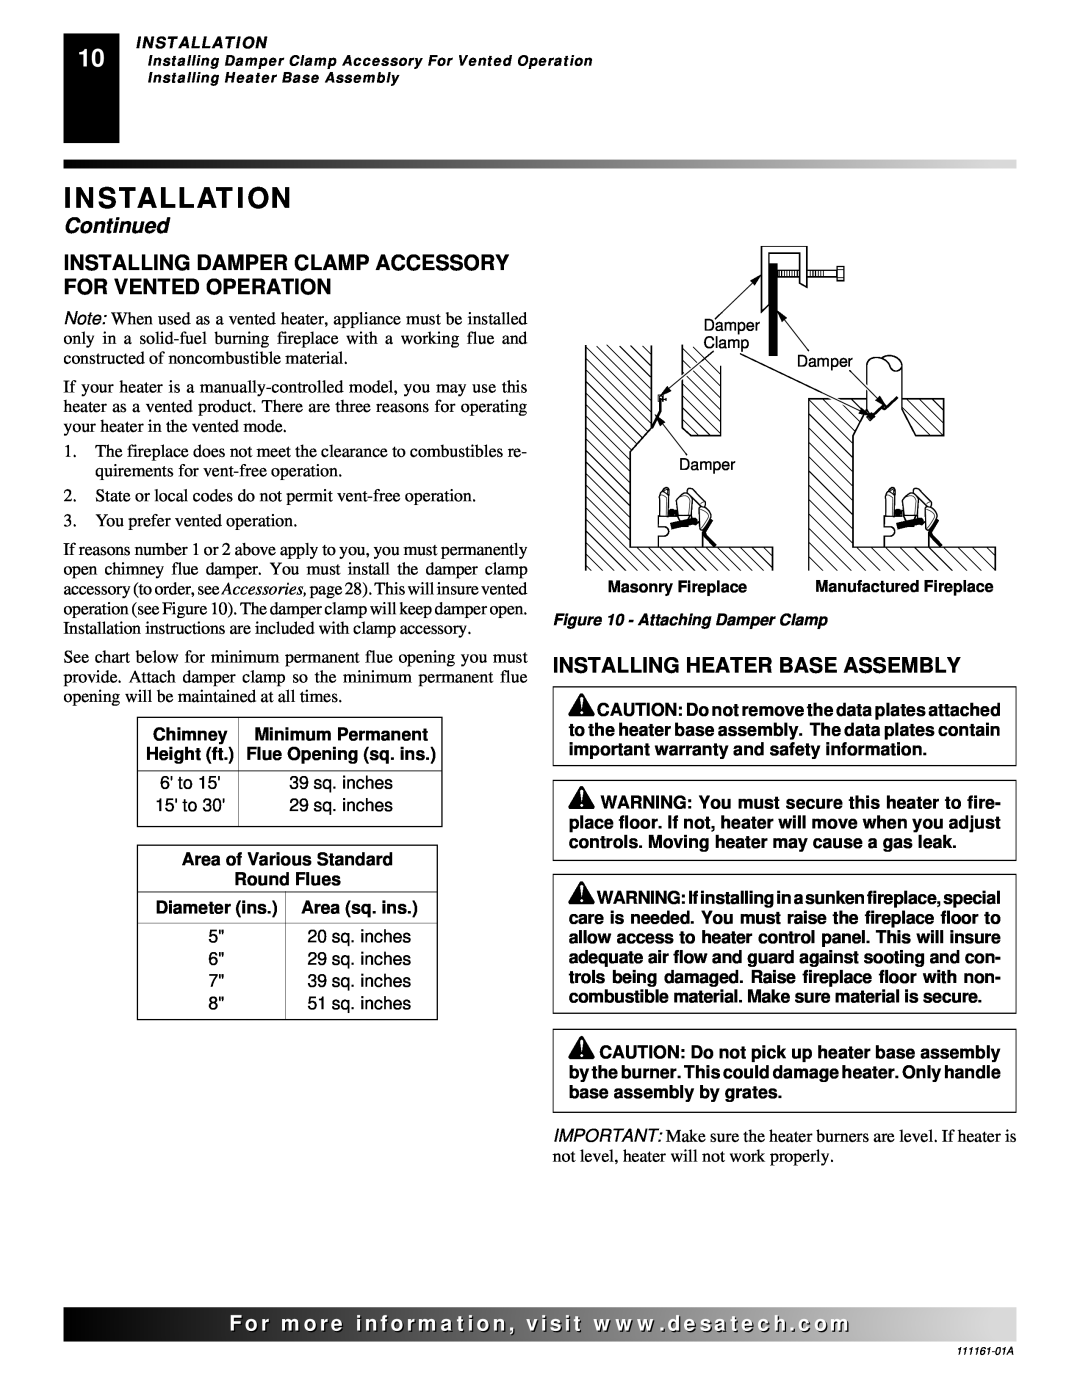 Desa CCL3018NRA, CCL3924PR Installing Heater Base Assembly, Installation, Continued, Chimney, Minimum Permanent, Height ft 